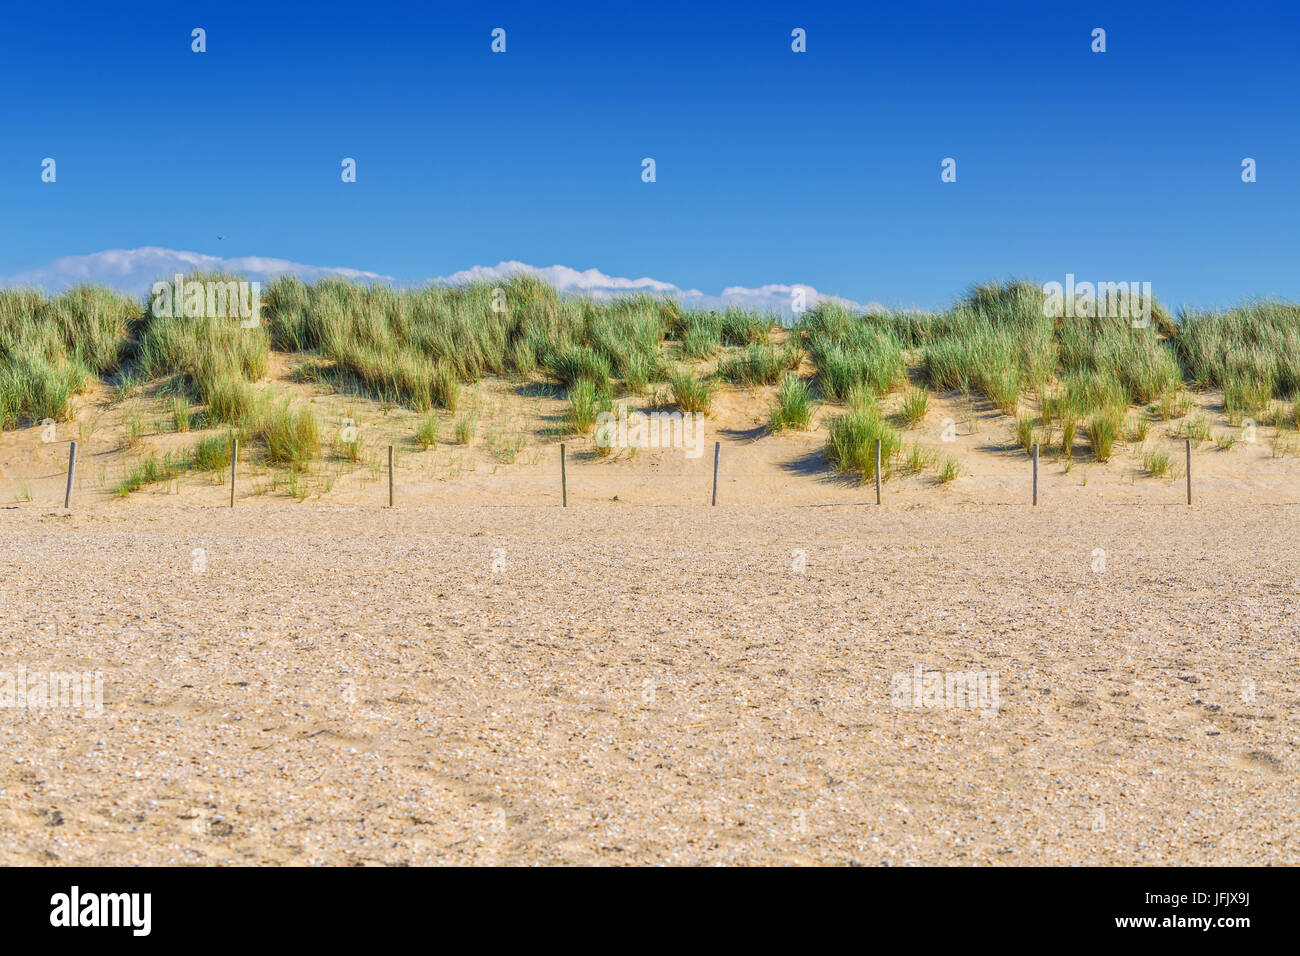 Protected landscape, dune on the beach of Holland Stock Photo